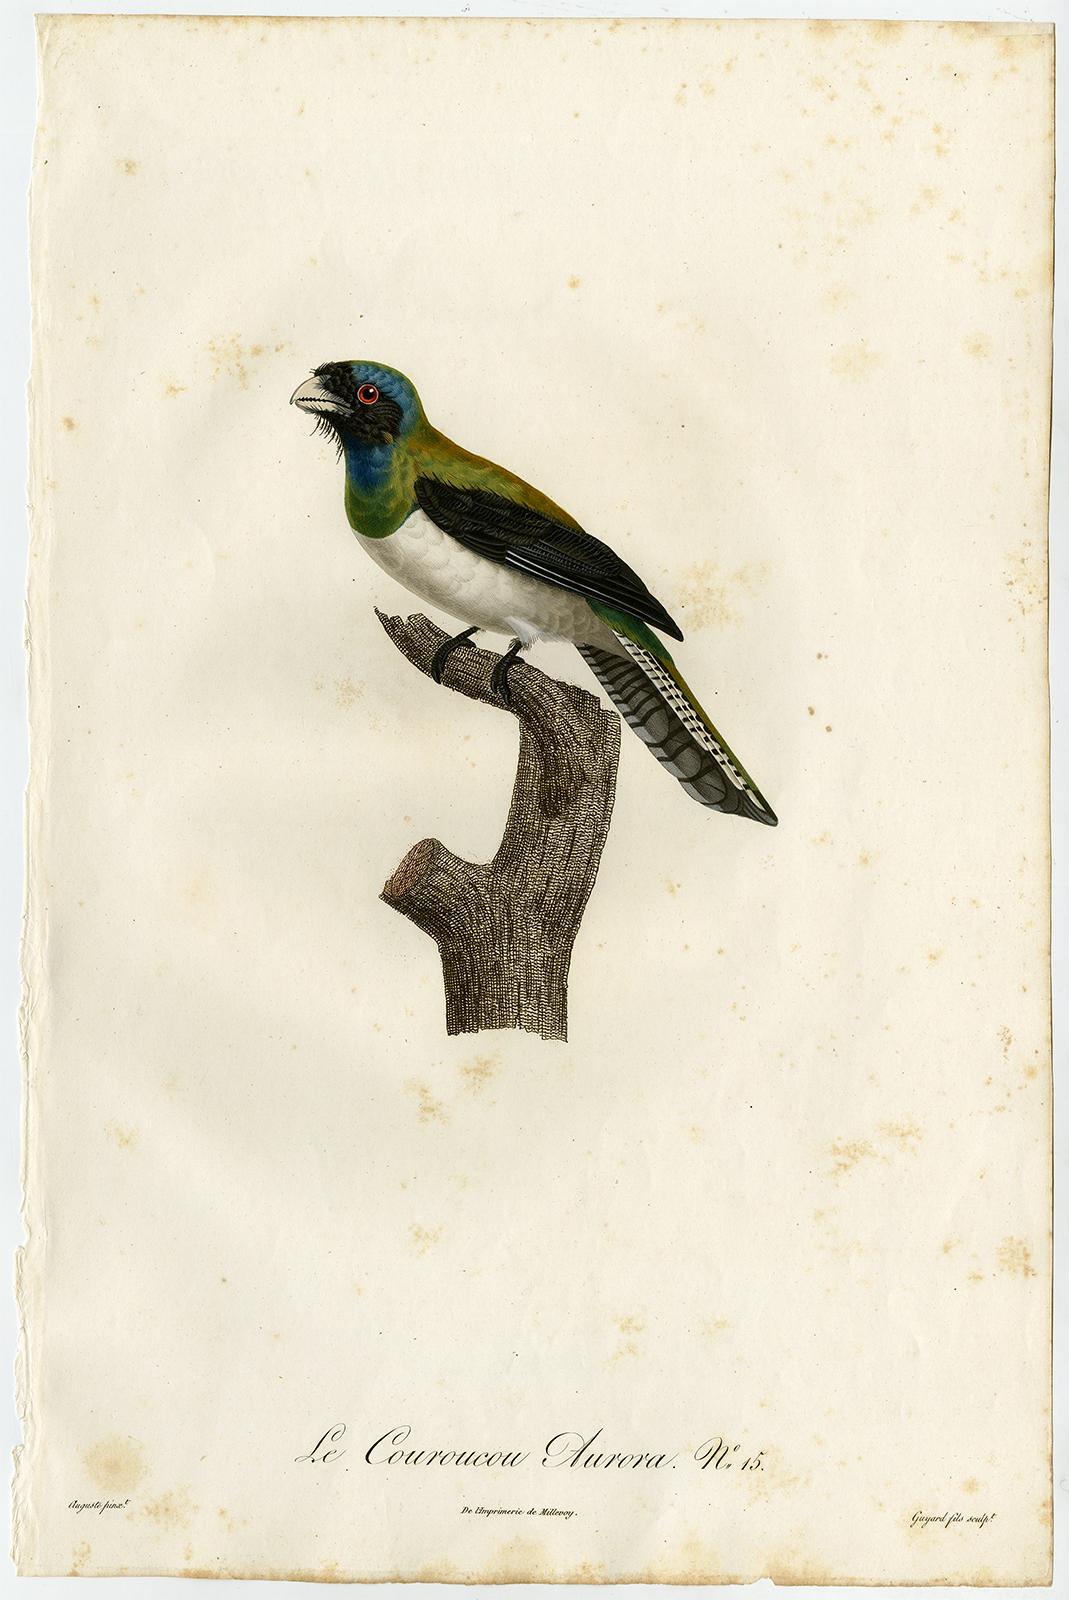 Jacques Barraband Animal Print - A curucui bird species by Barraband - Hand coloured etching - 19th century